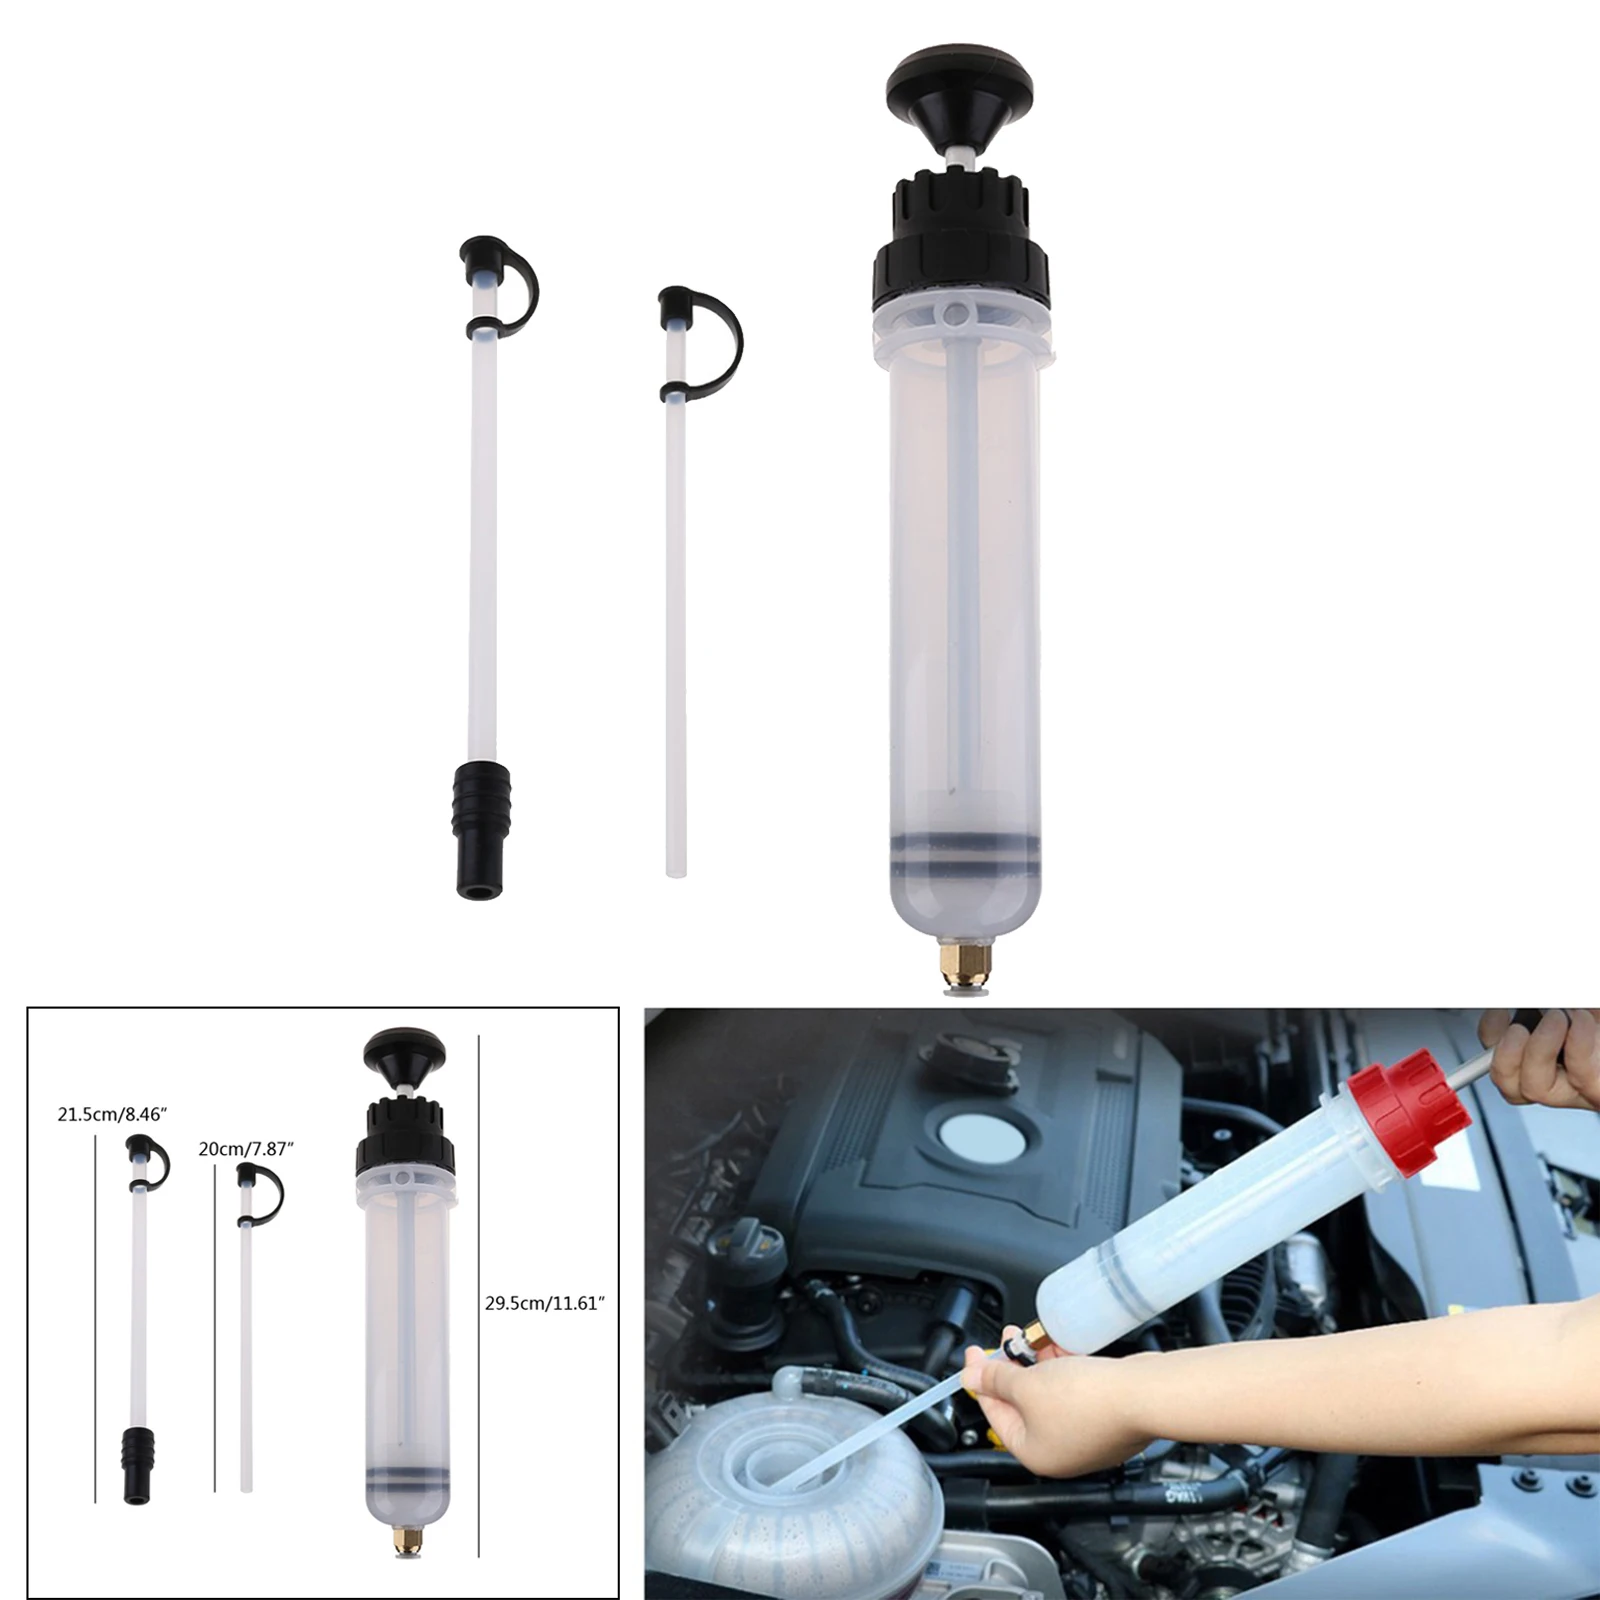 7OZ 200cc Car Oil Fluid Extractor Filling Syringe Bottle Transfer Hand Pump Tools .Sturdy, Leakless, Accurate, Reliable